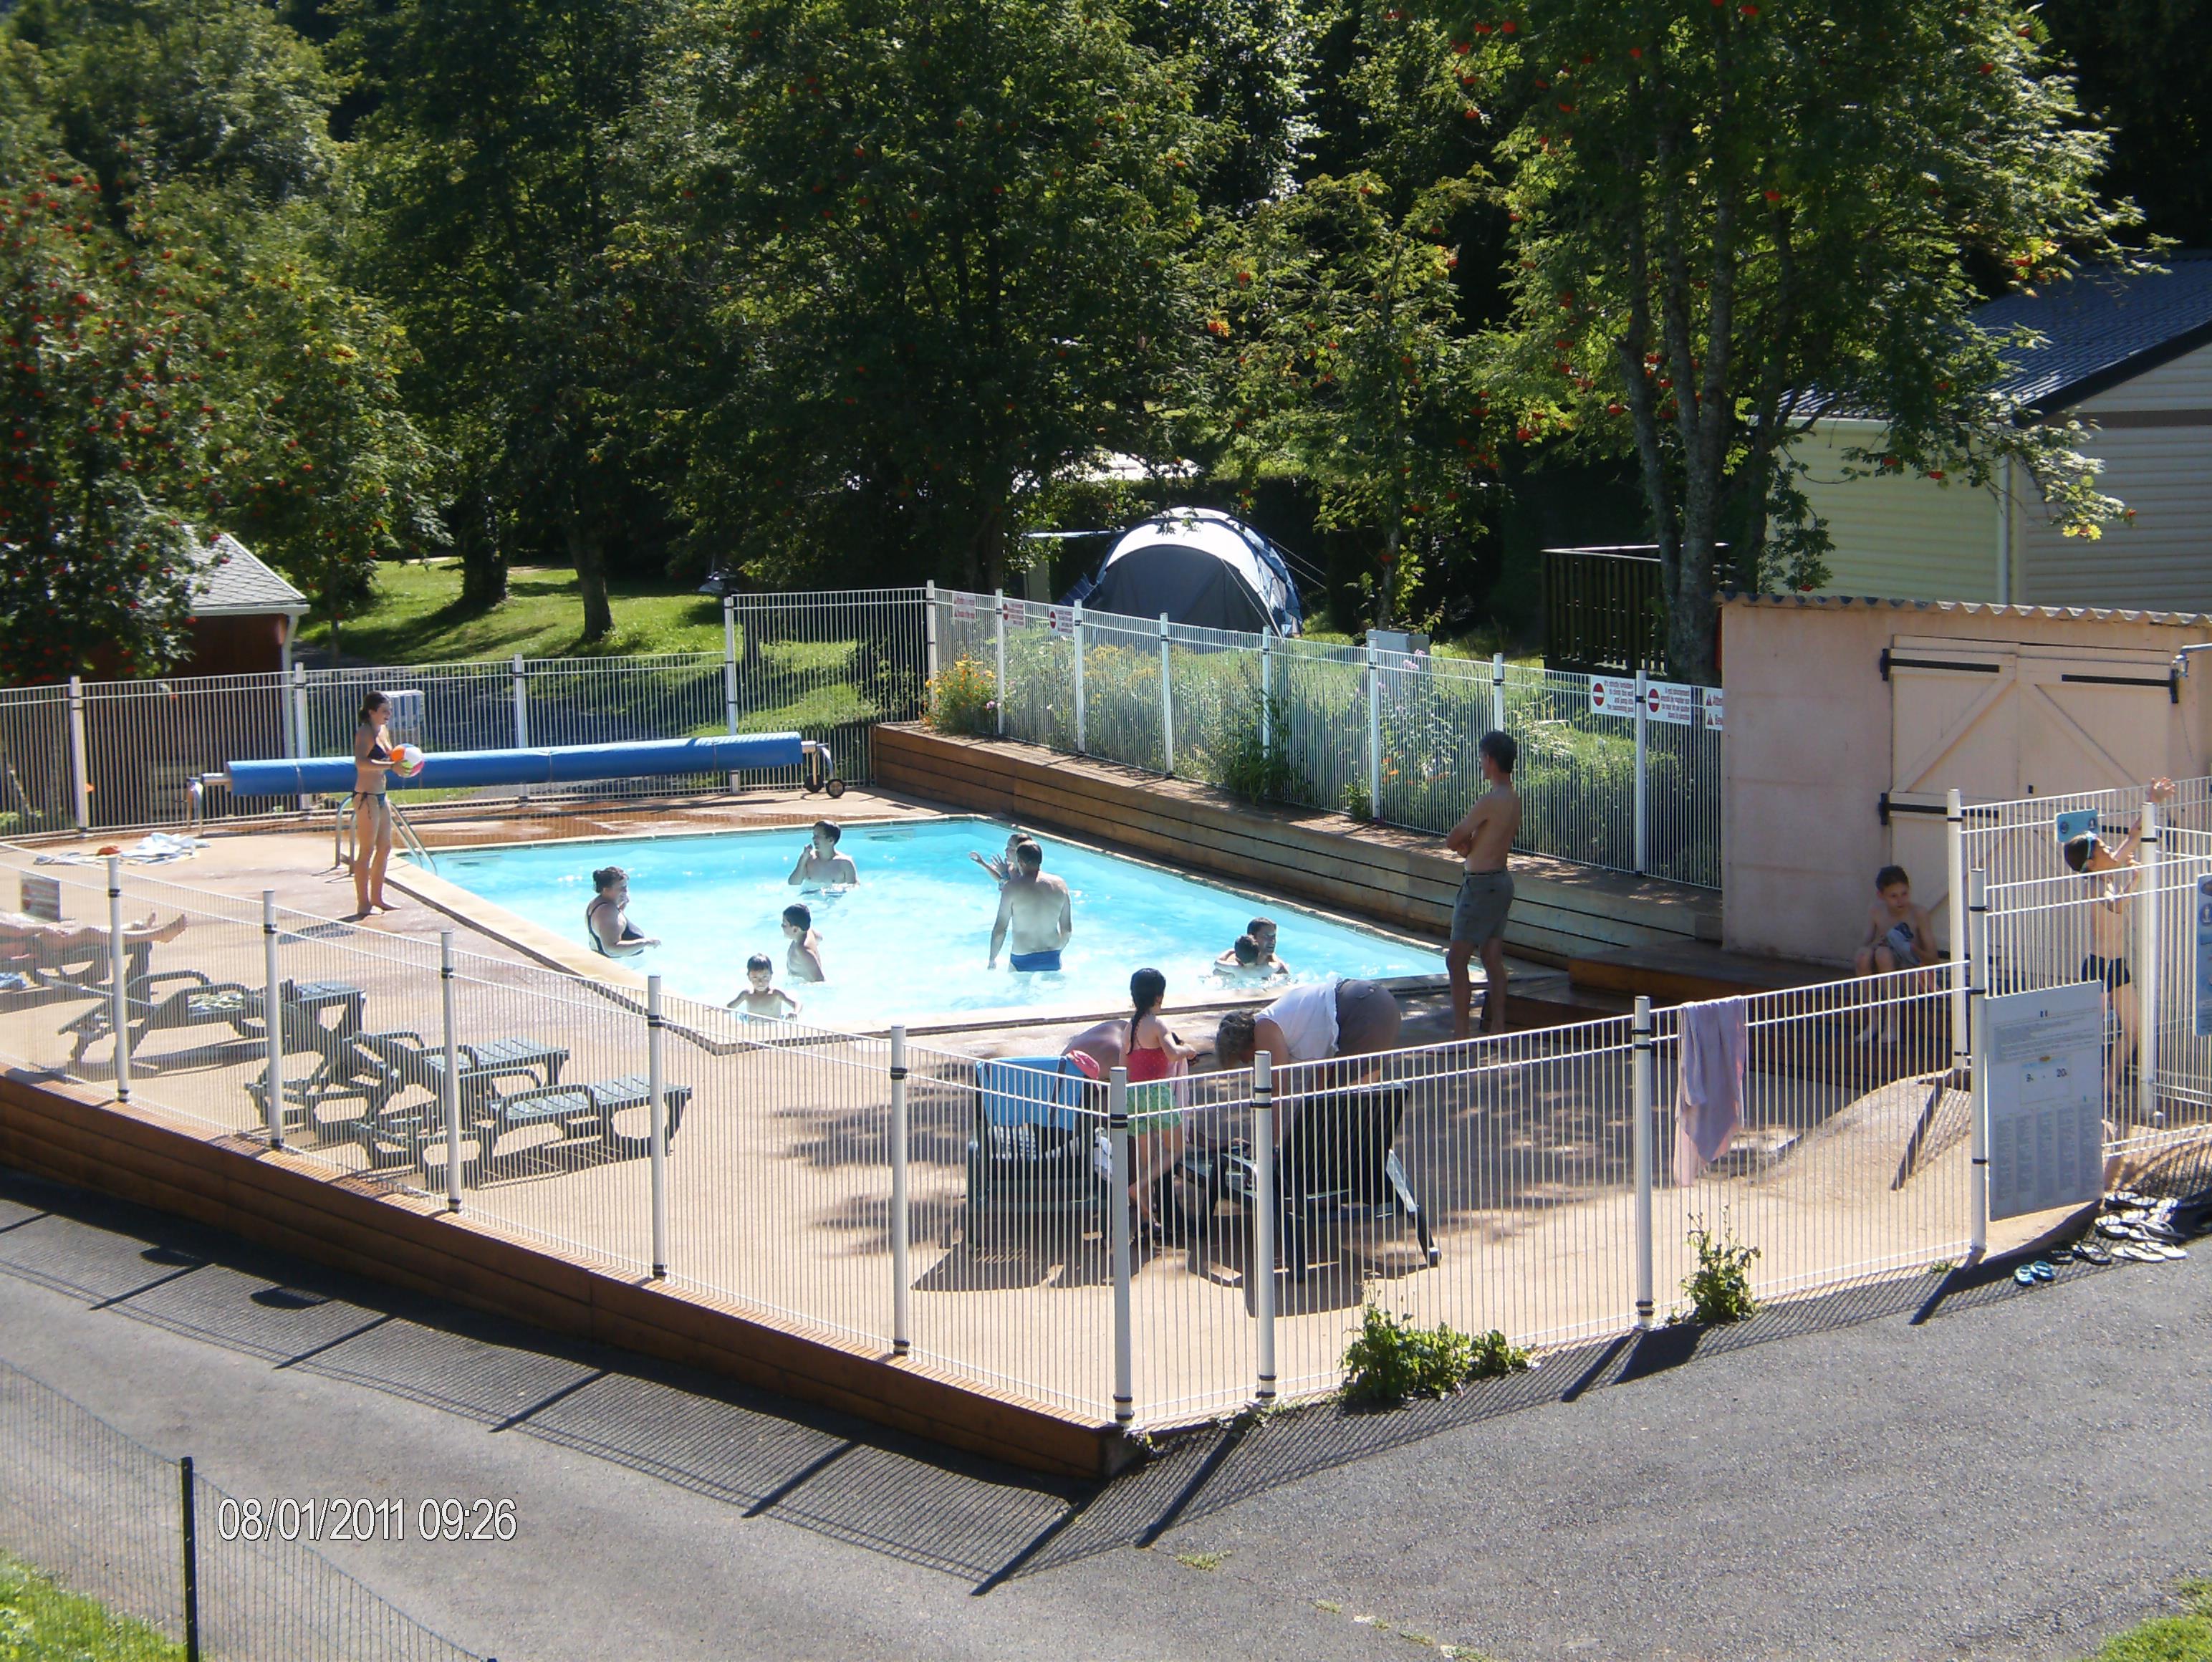 Beaches Camping L'ombrage - St Pierre Colamine